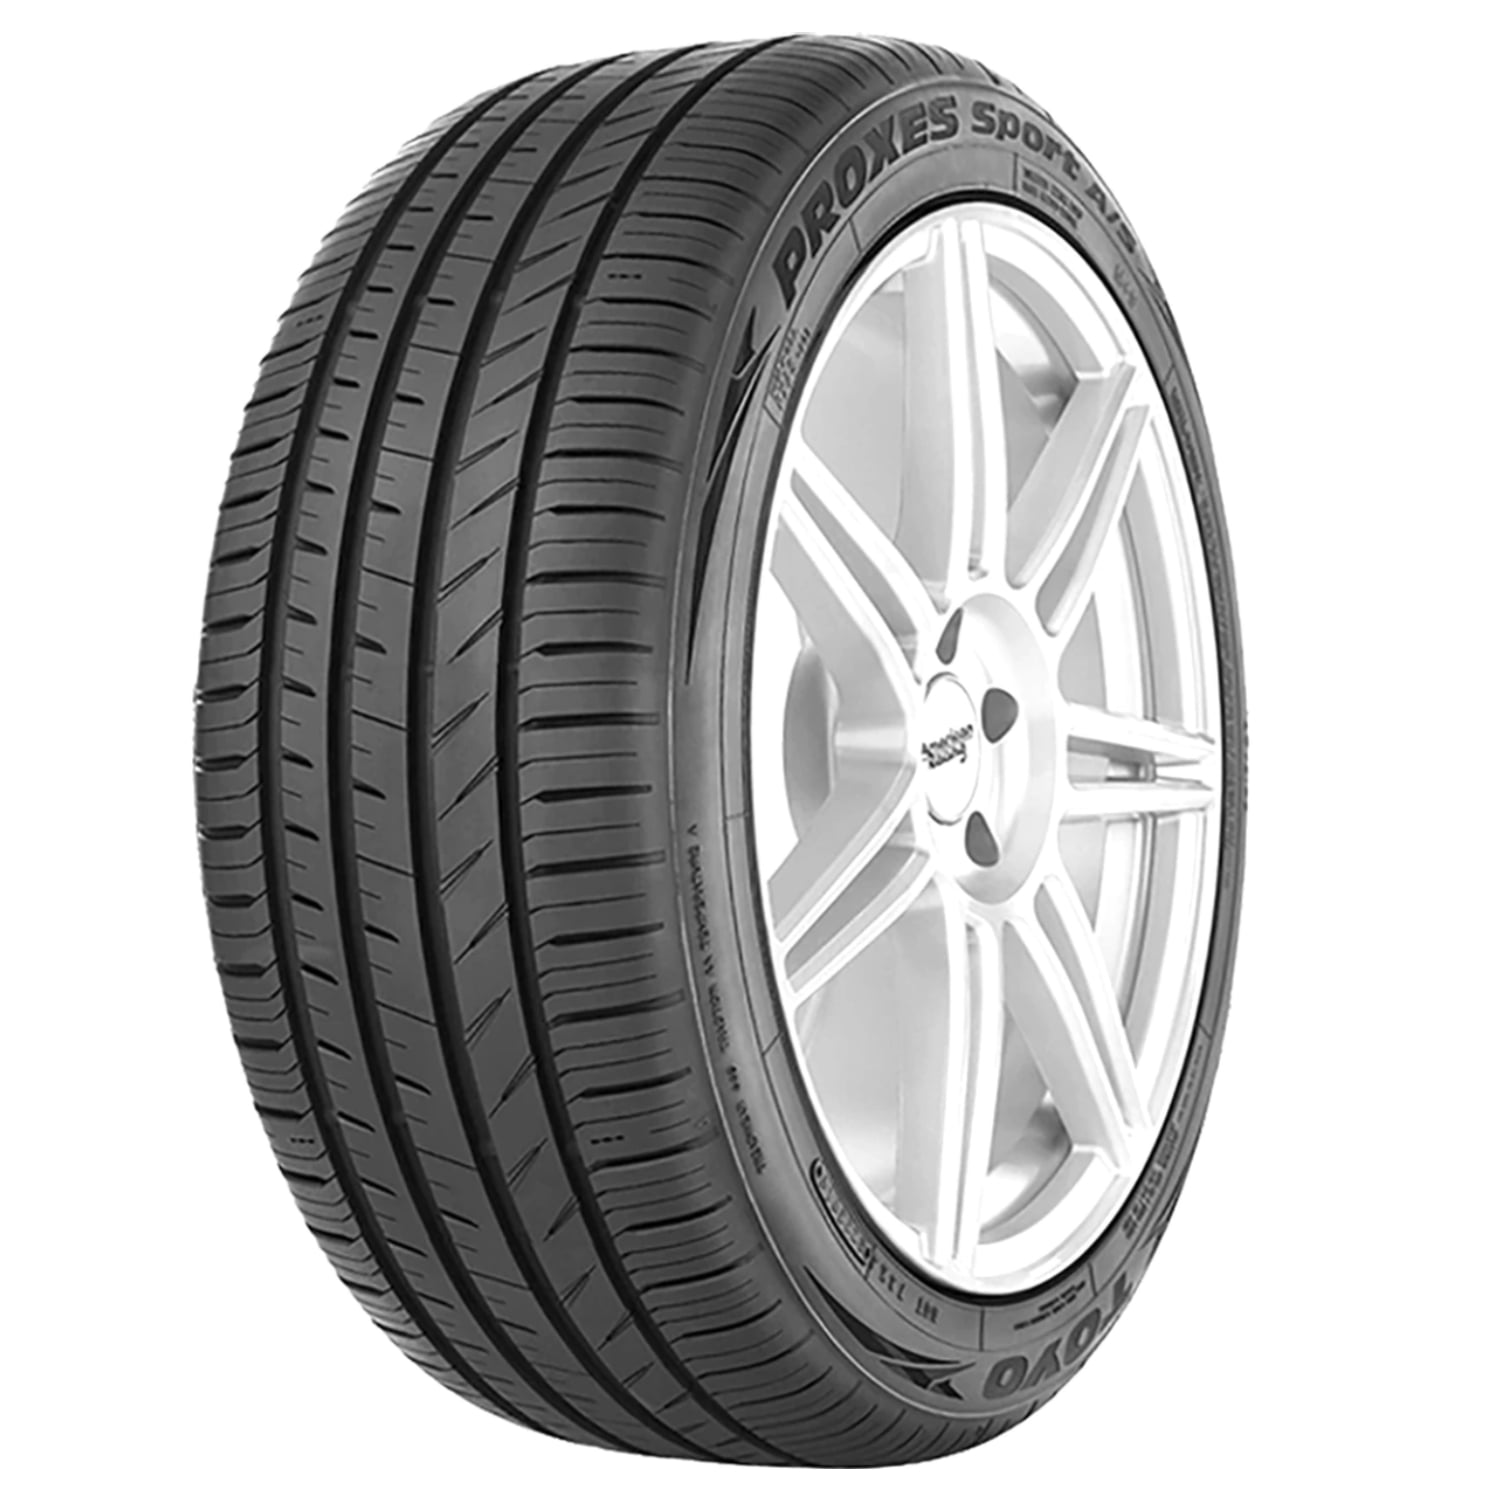 Premium, dependable, and long-lasting tires for trucks, cars, SUV